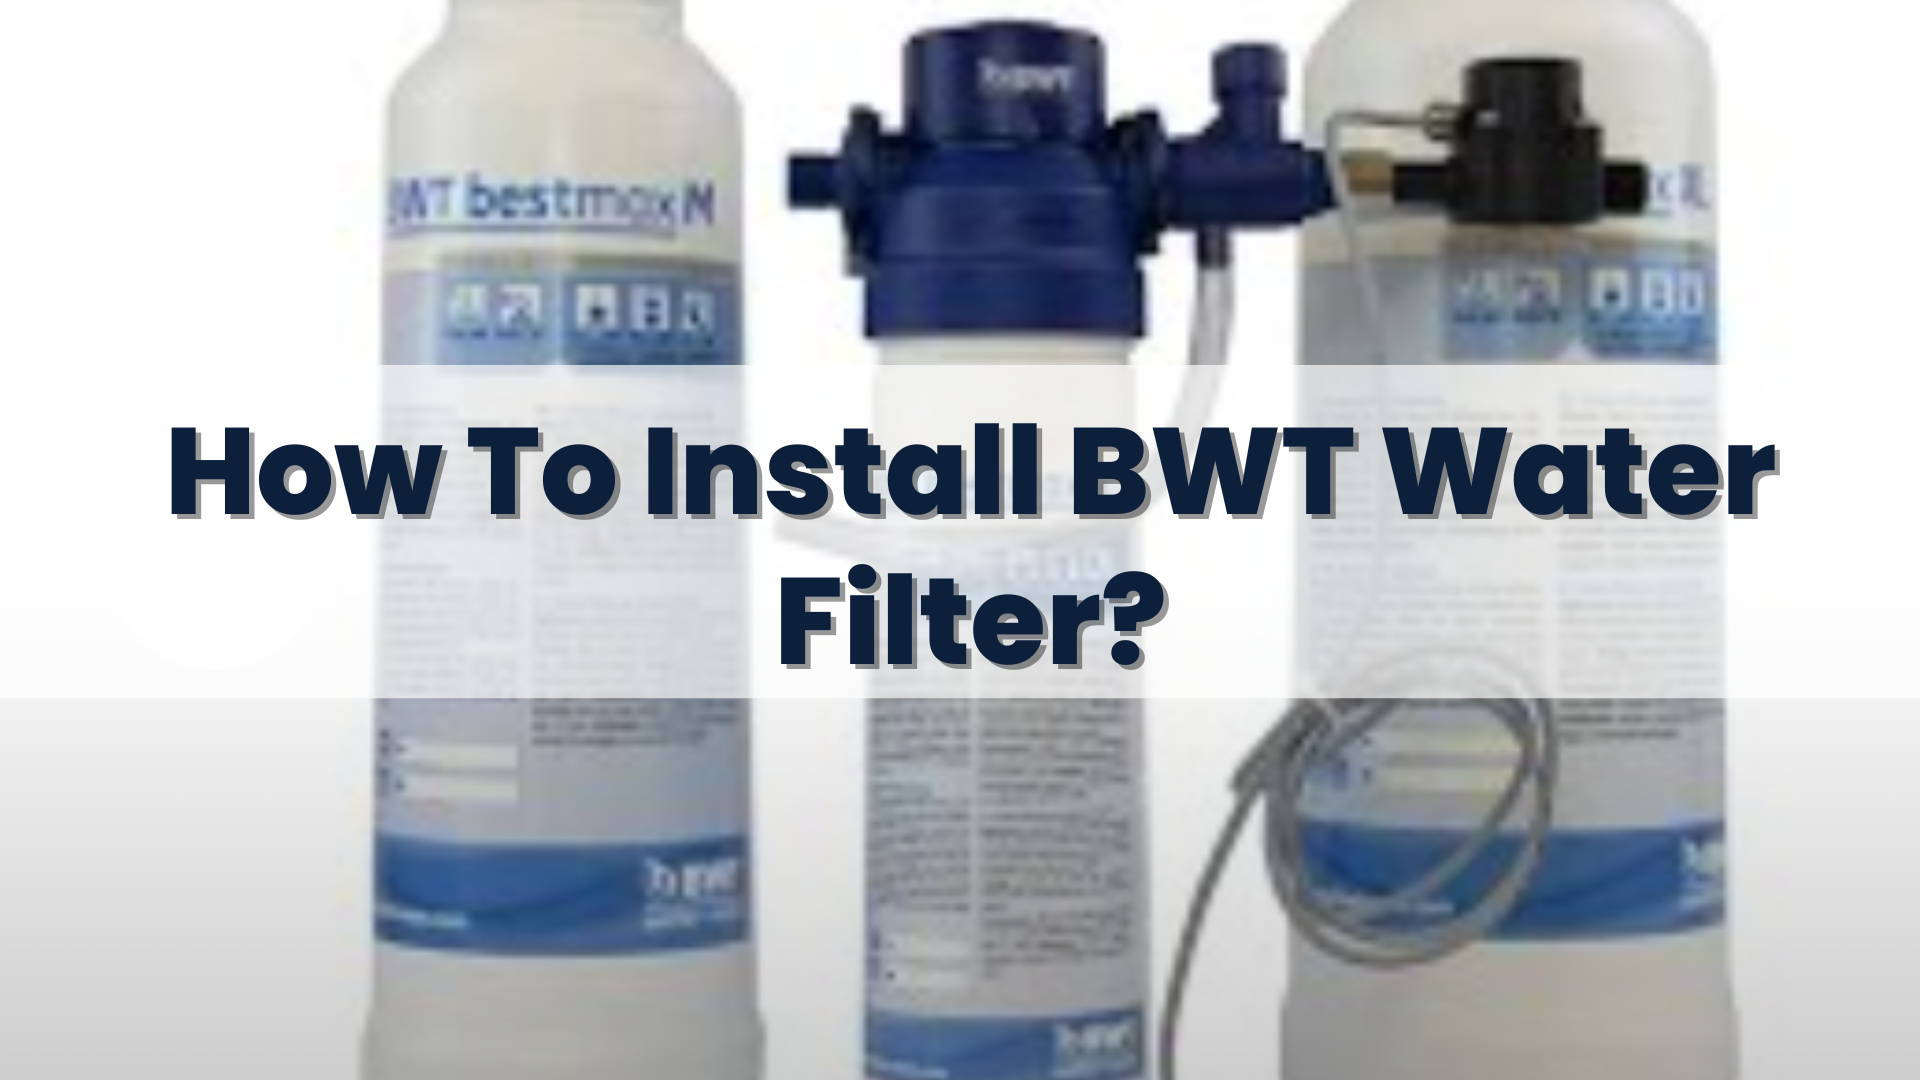 How To Install BWT Water Filter